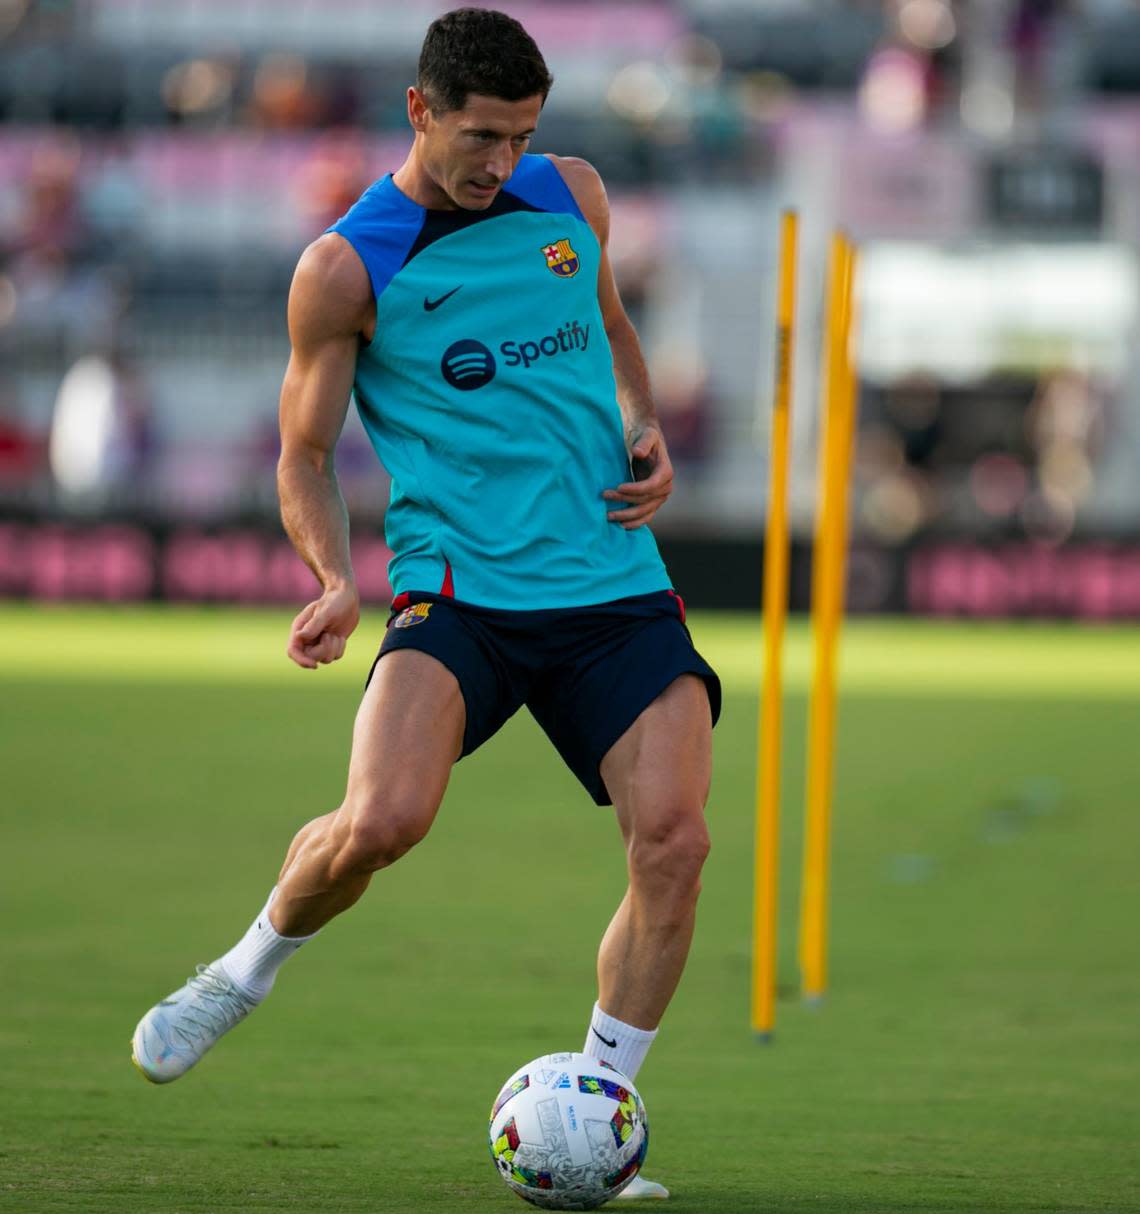 FC Barcelona forward Robert Lewandowski warms up before his friendly soccer match against Inter Miami CF at DRV PNK Stadium on Tuesday, July 19, 2022, in Fort Lauderdale, Fla.